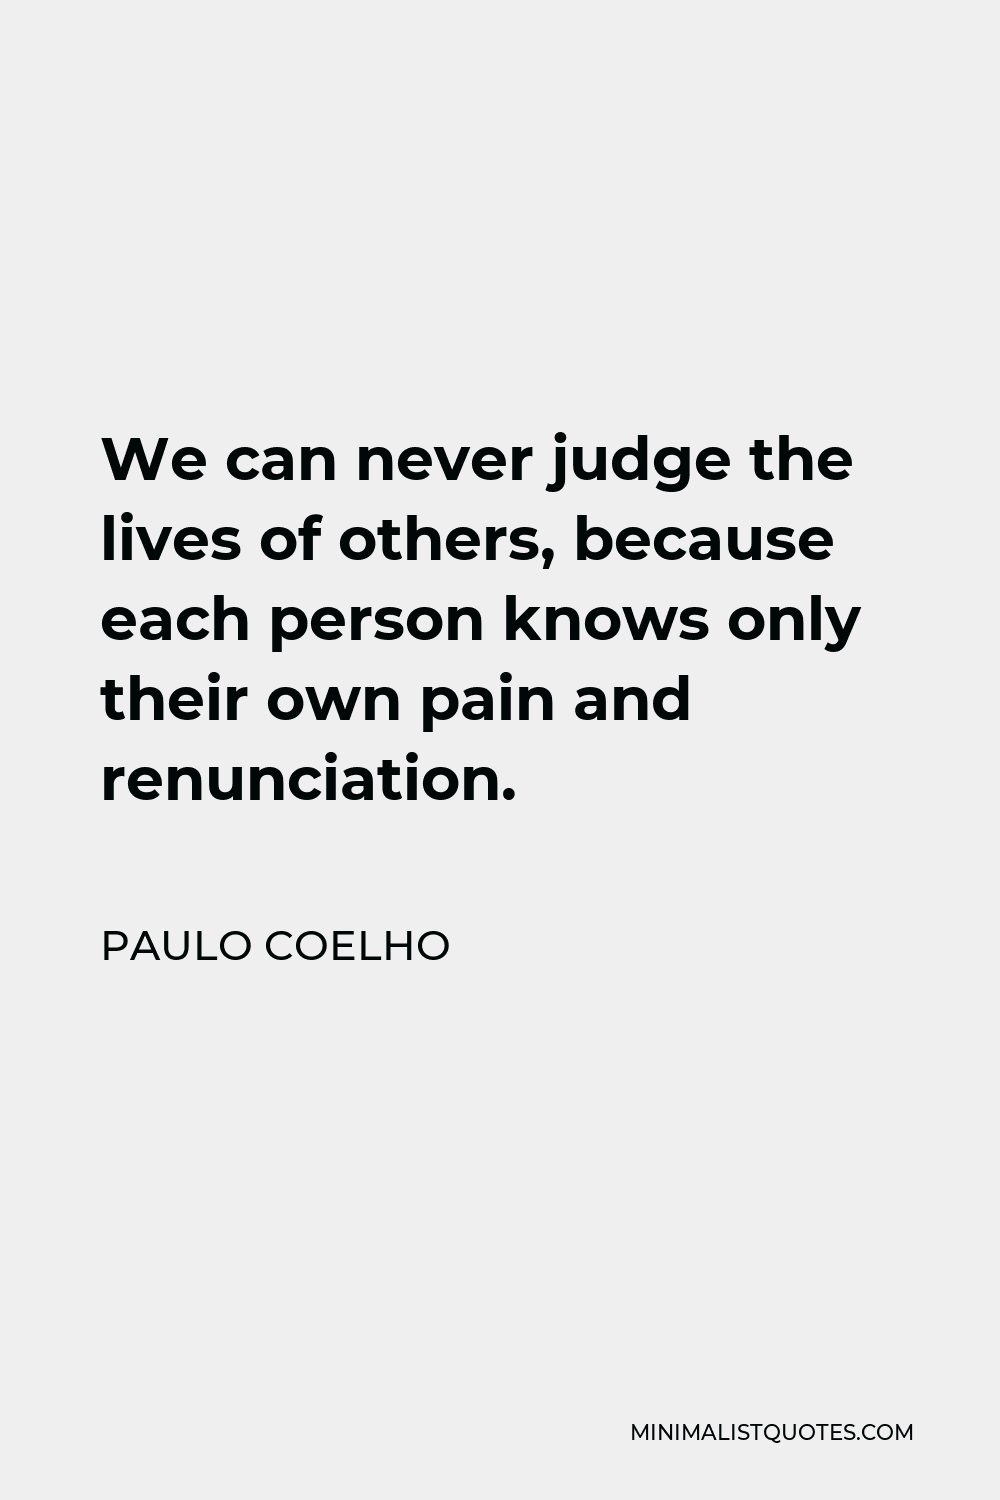 Paulo Coelho Quote - We can never judge the lives of others, because each person knows only their own pain and renunciation.